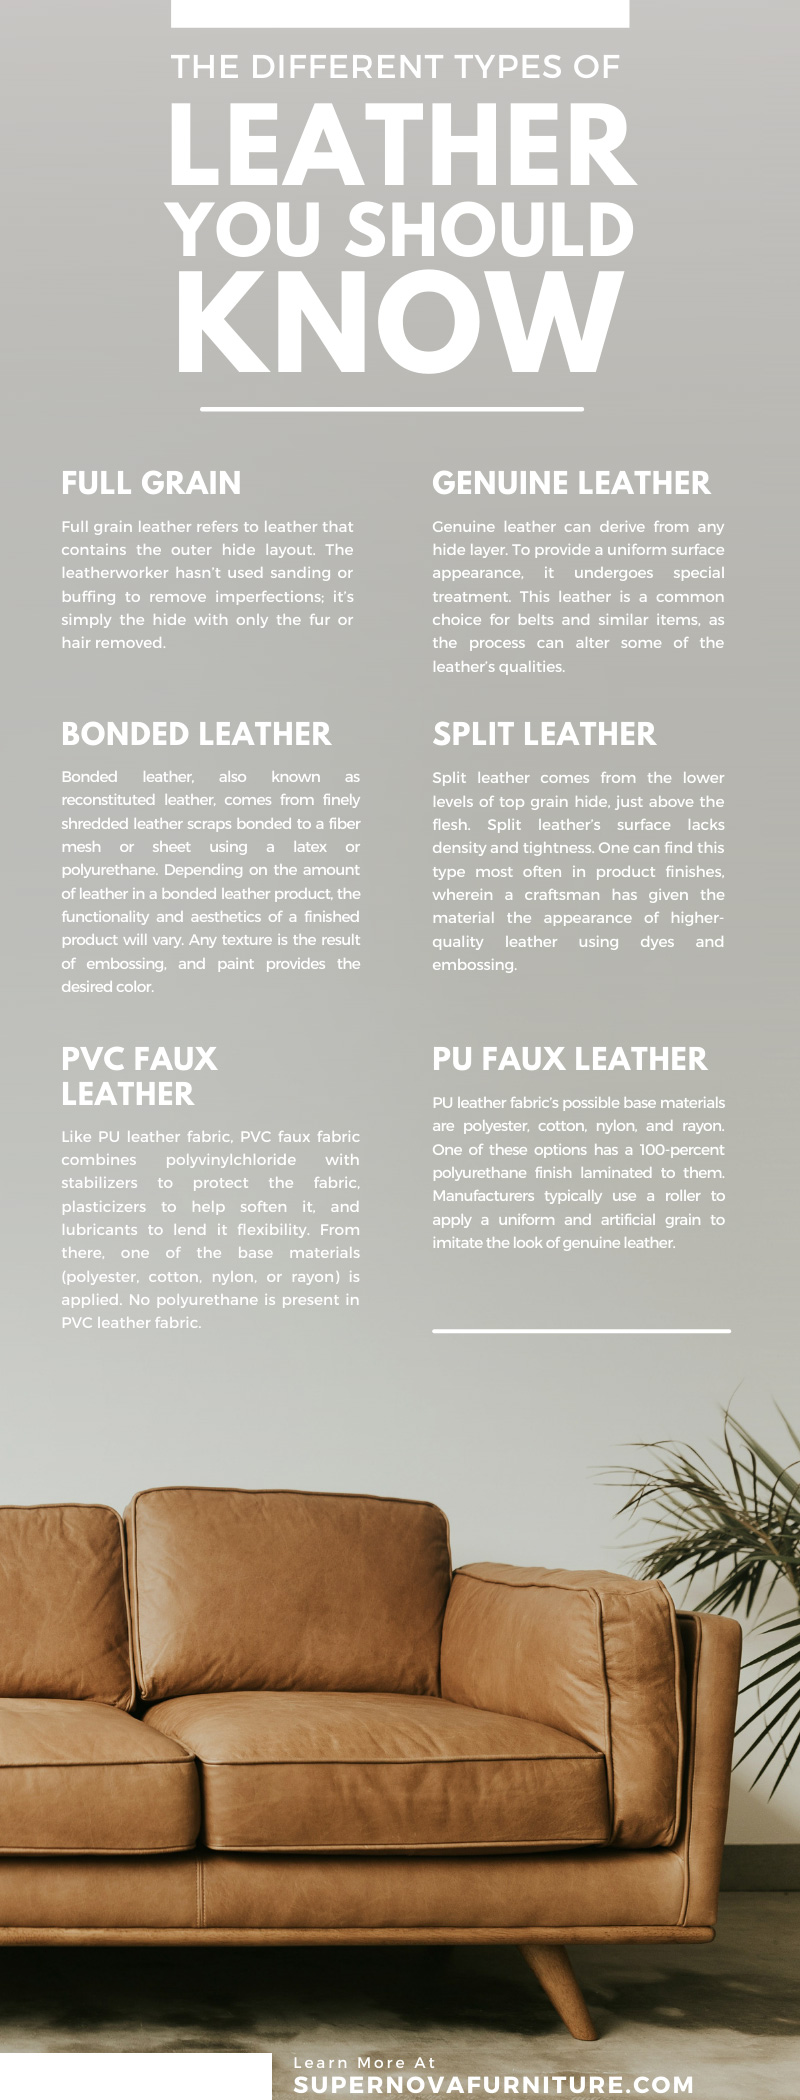 The Different Types of Leather You Should Know